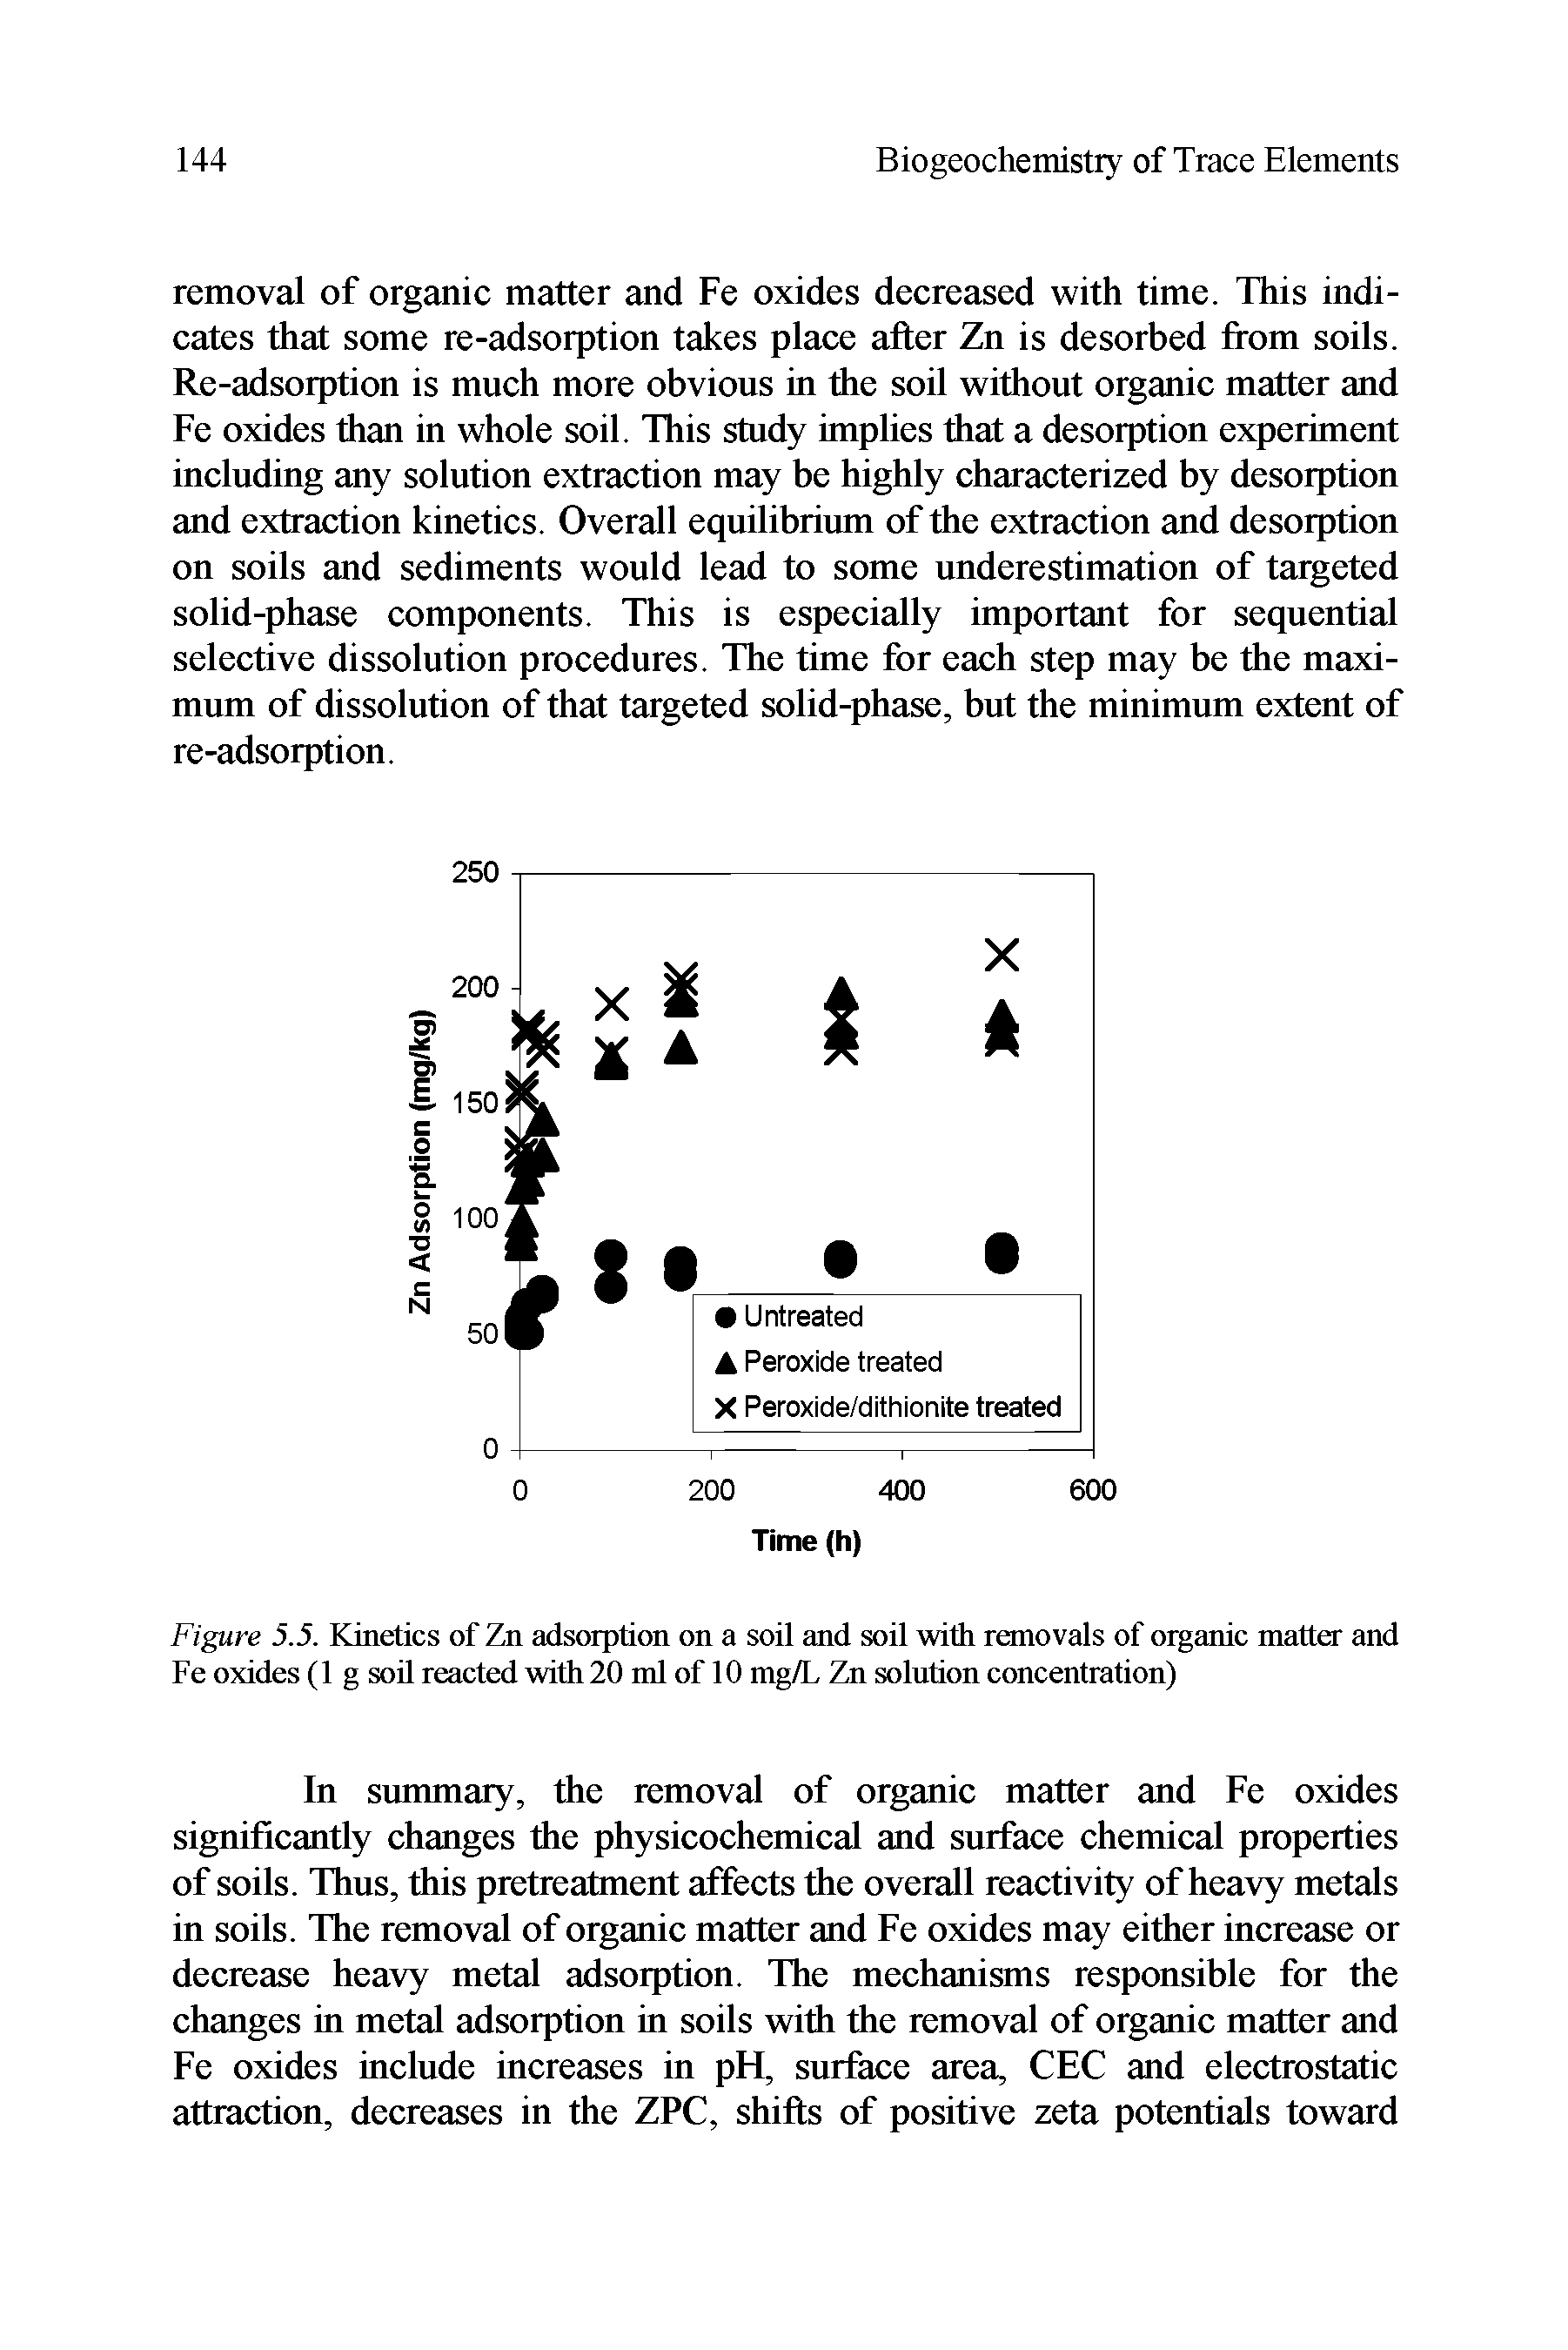 Figure 5.5. Kinetics of Zn adsorption on a soil and soil with removals of organic matter and Fe oxides (1 g soil reacted with 20 ml of 10 mg/L Zn solution concentration)...